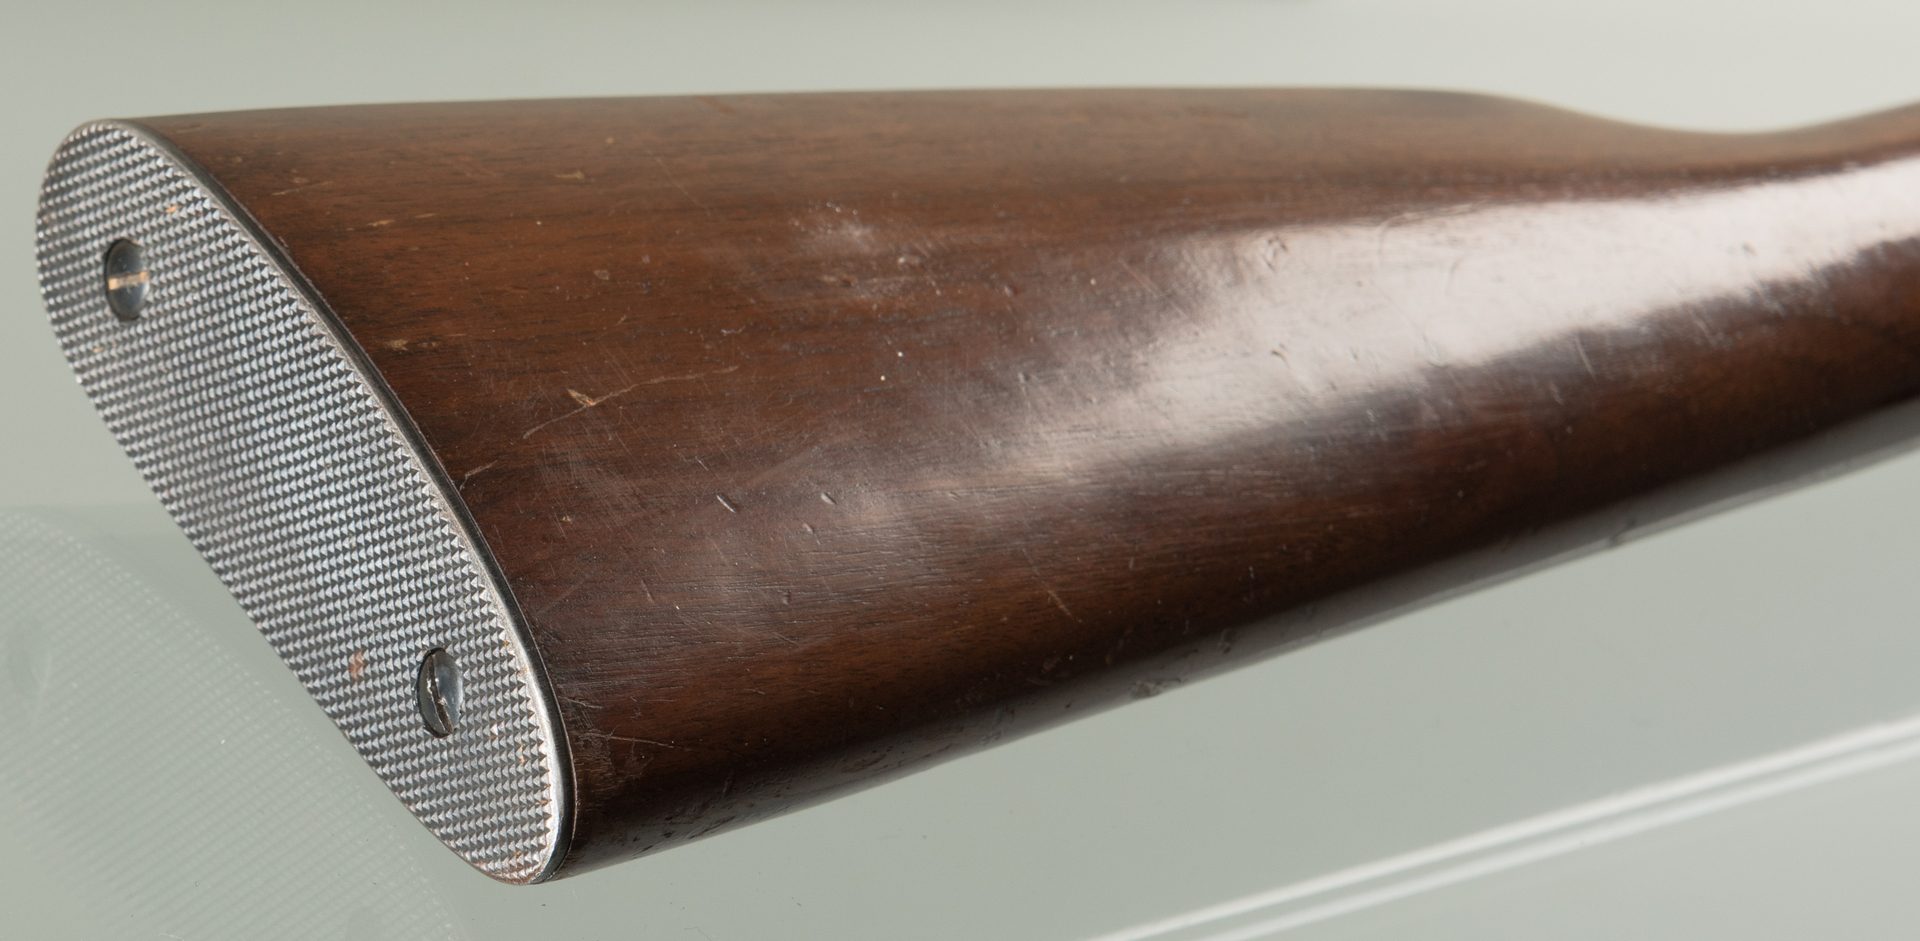 Lot 824: Winchester Model 1894, 30-30 Win Lever Action Rifle